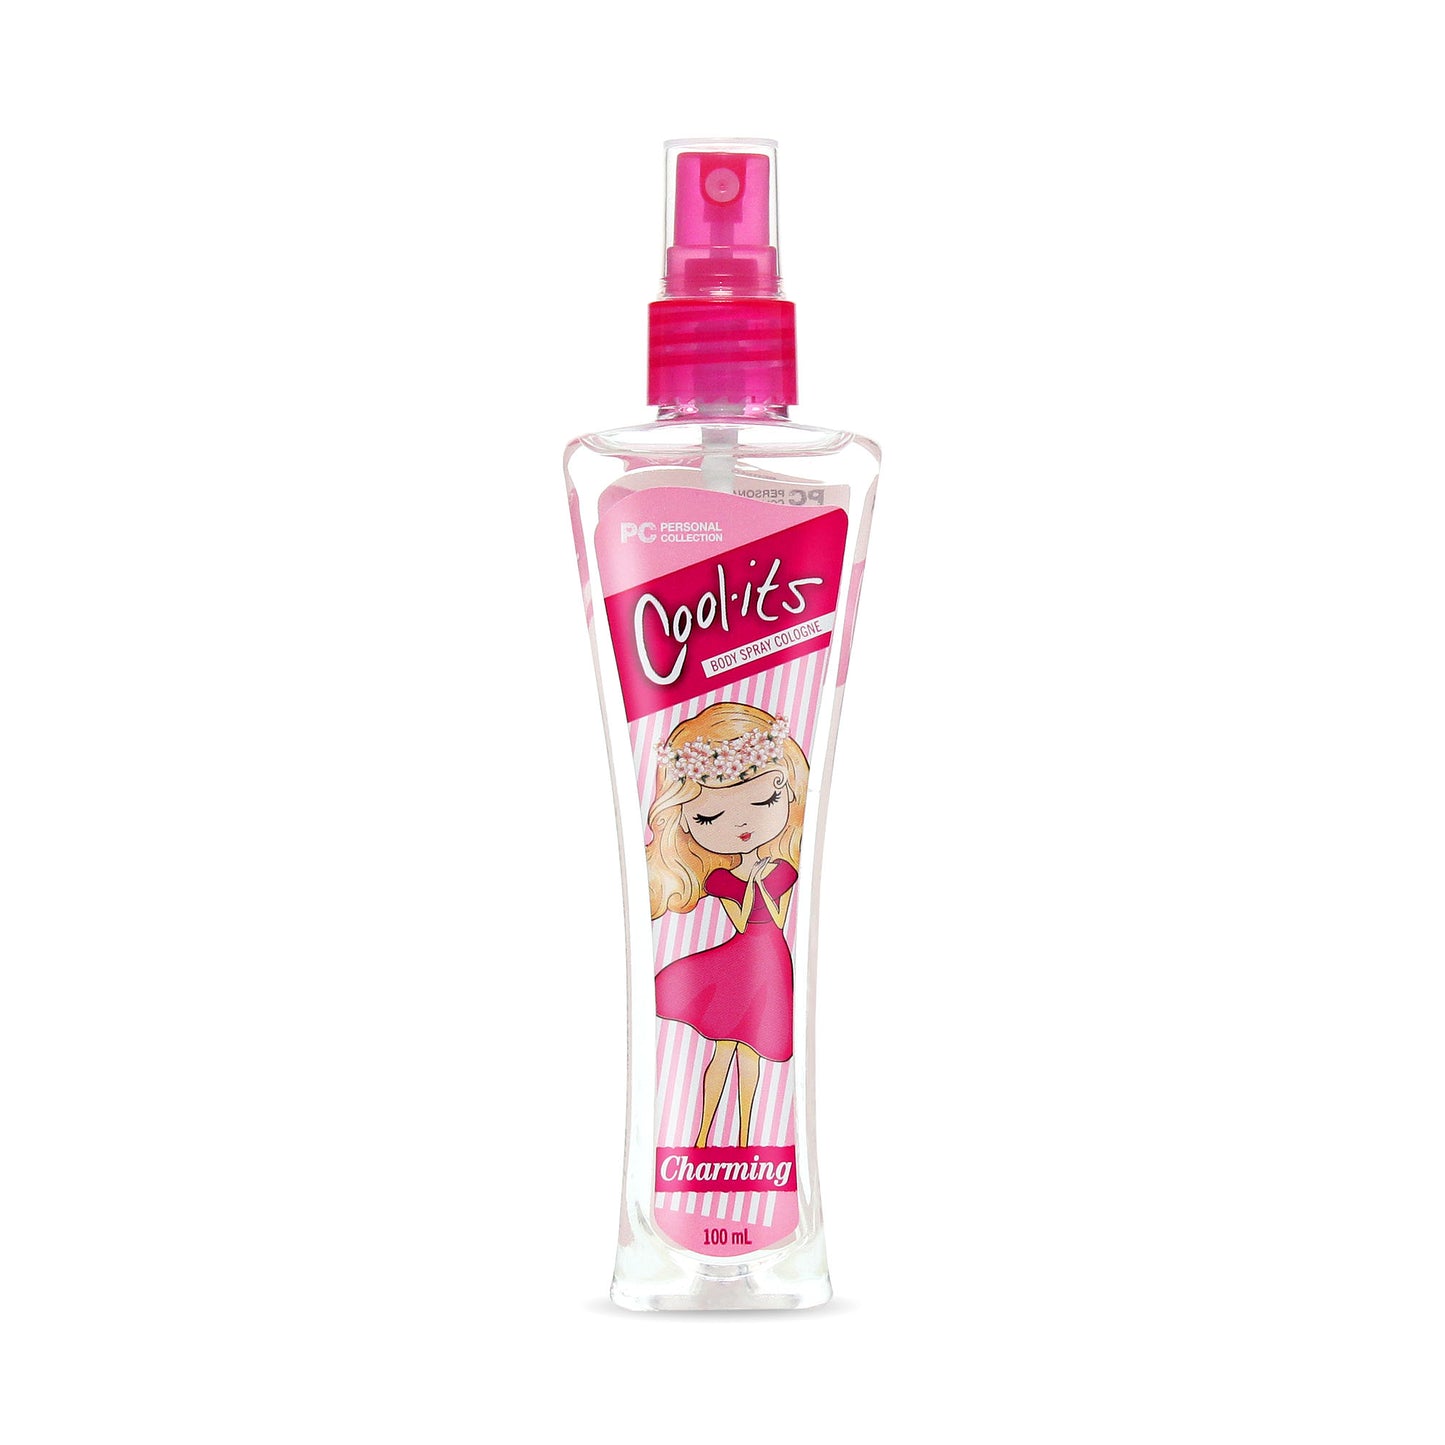 Cool-Its Charming Body Spray Cologne 100ml